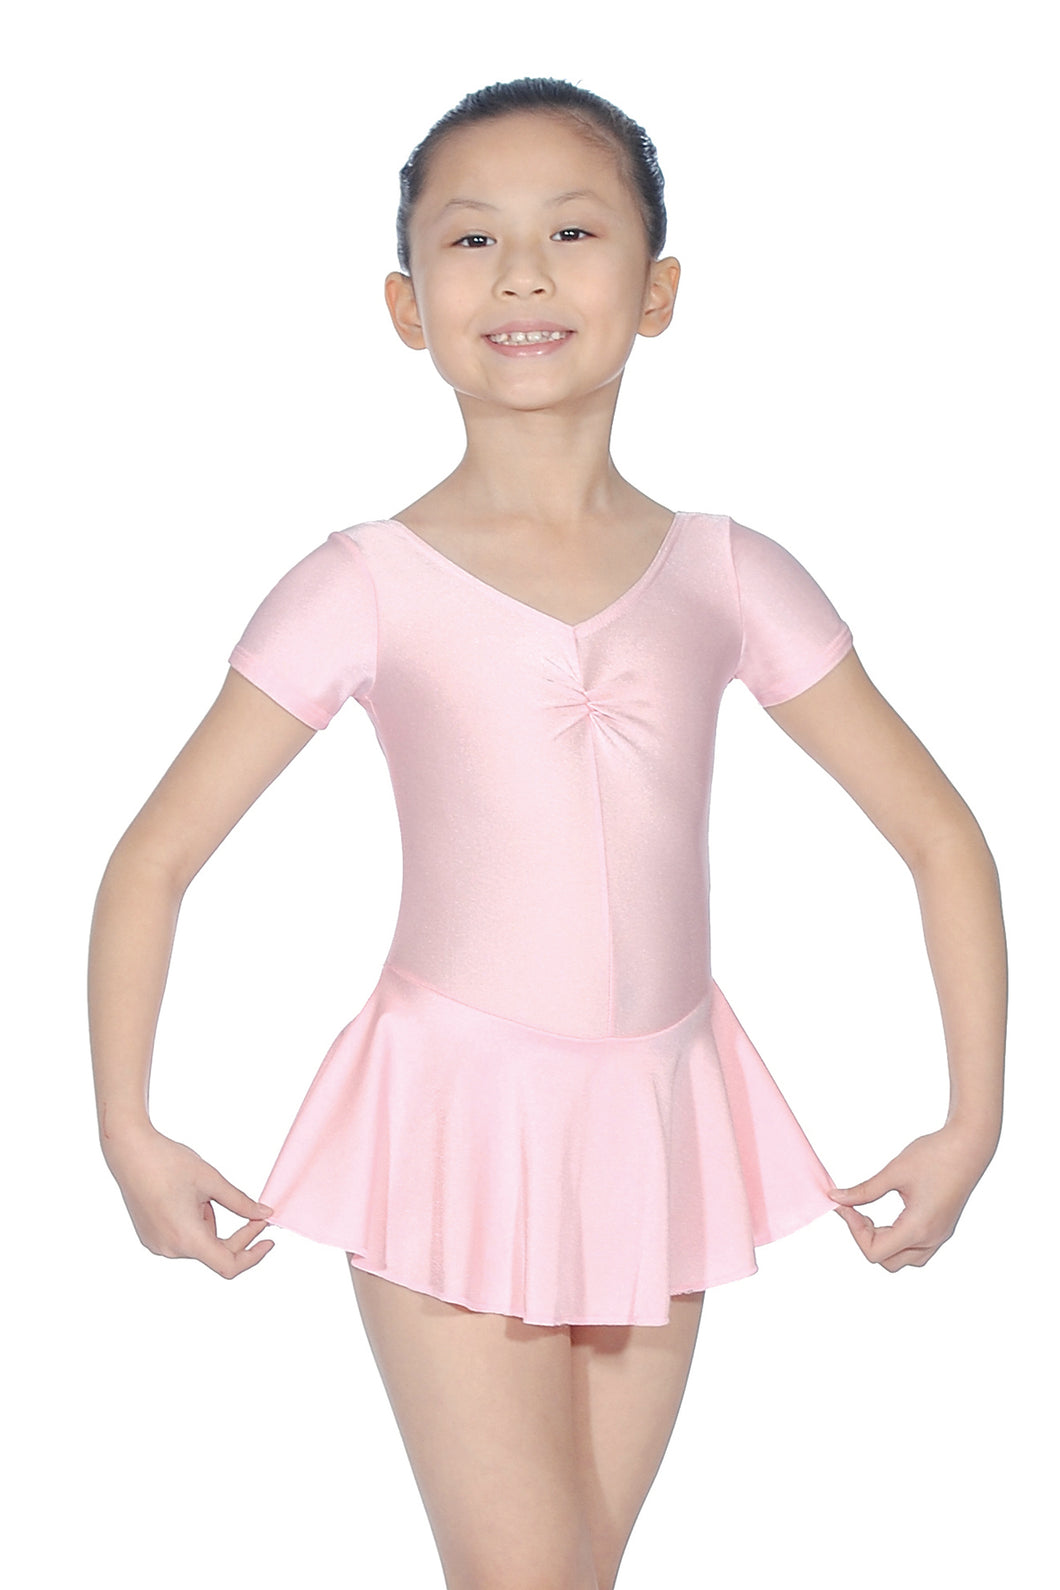 Roch Valley Capped sleeve pink leotard with attached skirt